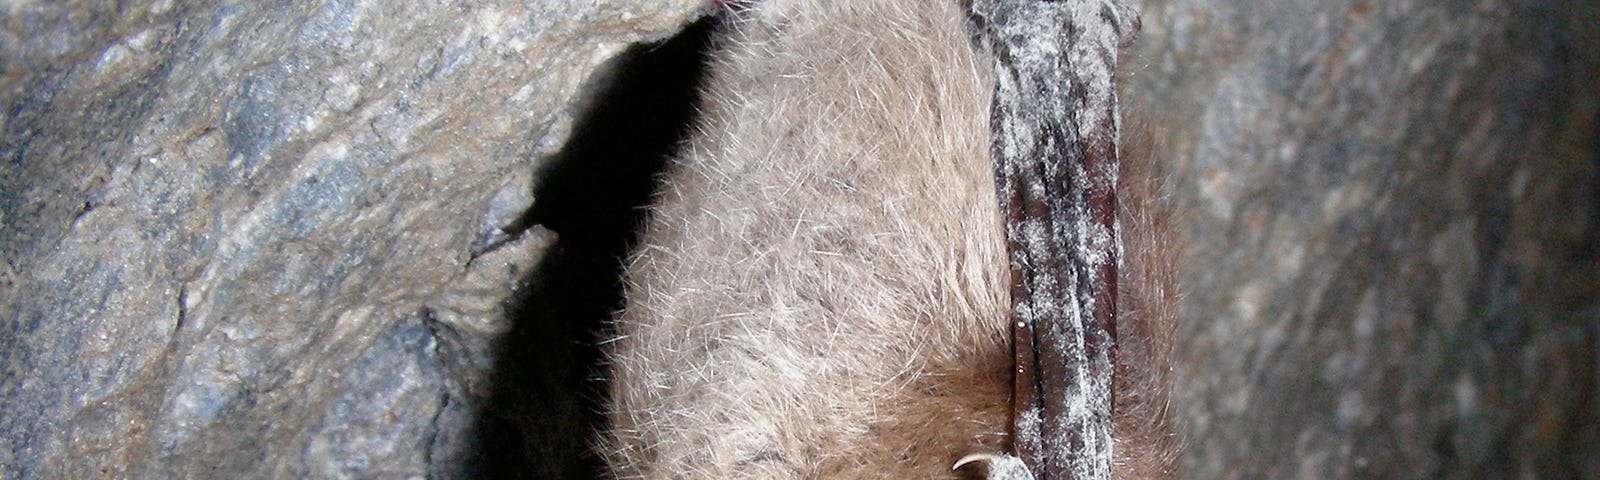 A brown bat with white fuzz on its muzzle hangs from the roof of a cave